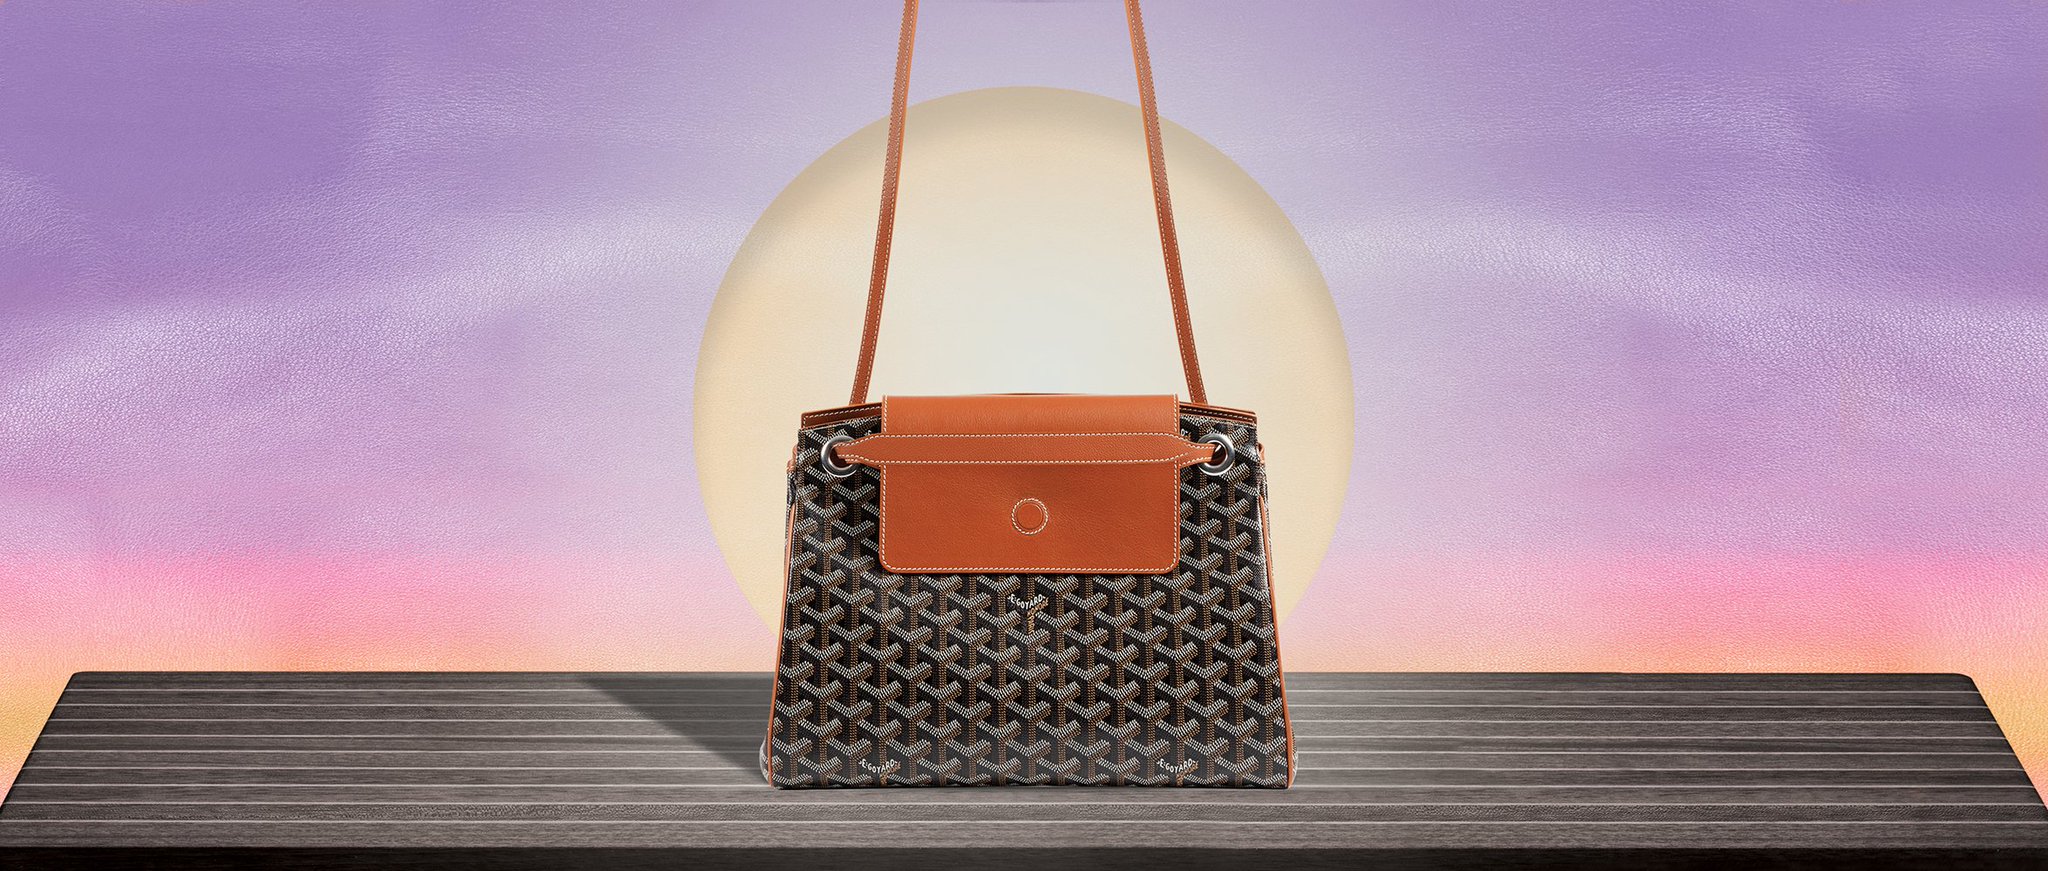 The Rouette Soft Bag / Le Sac Souple Rouette  *Introducing the Rouette  soft bag. The new instant classic by Goyard is an amazing shapeshifter with  almost as many ways to wear